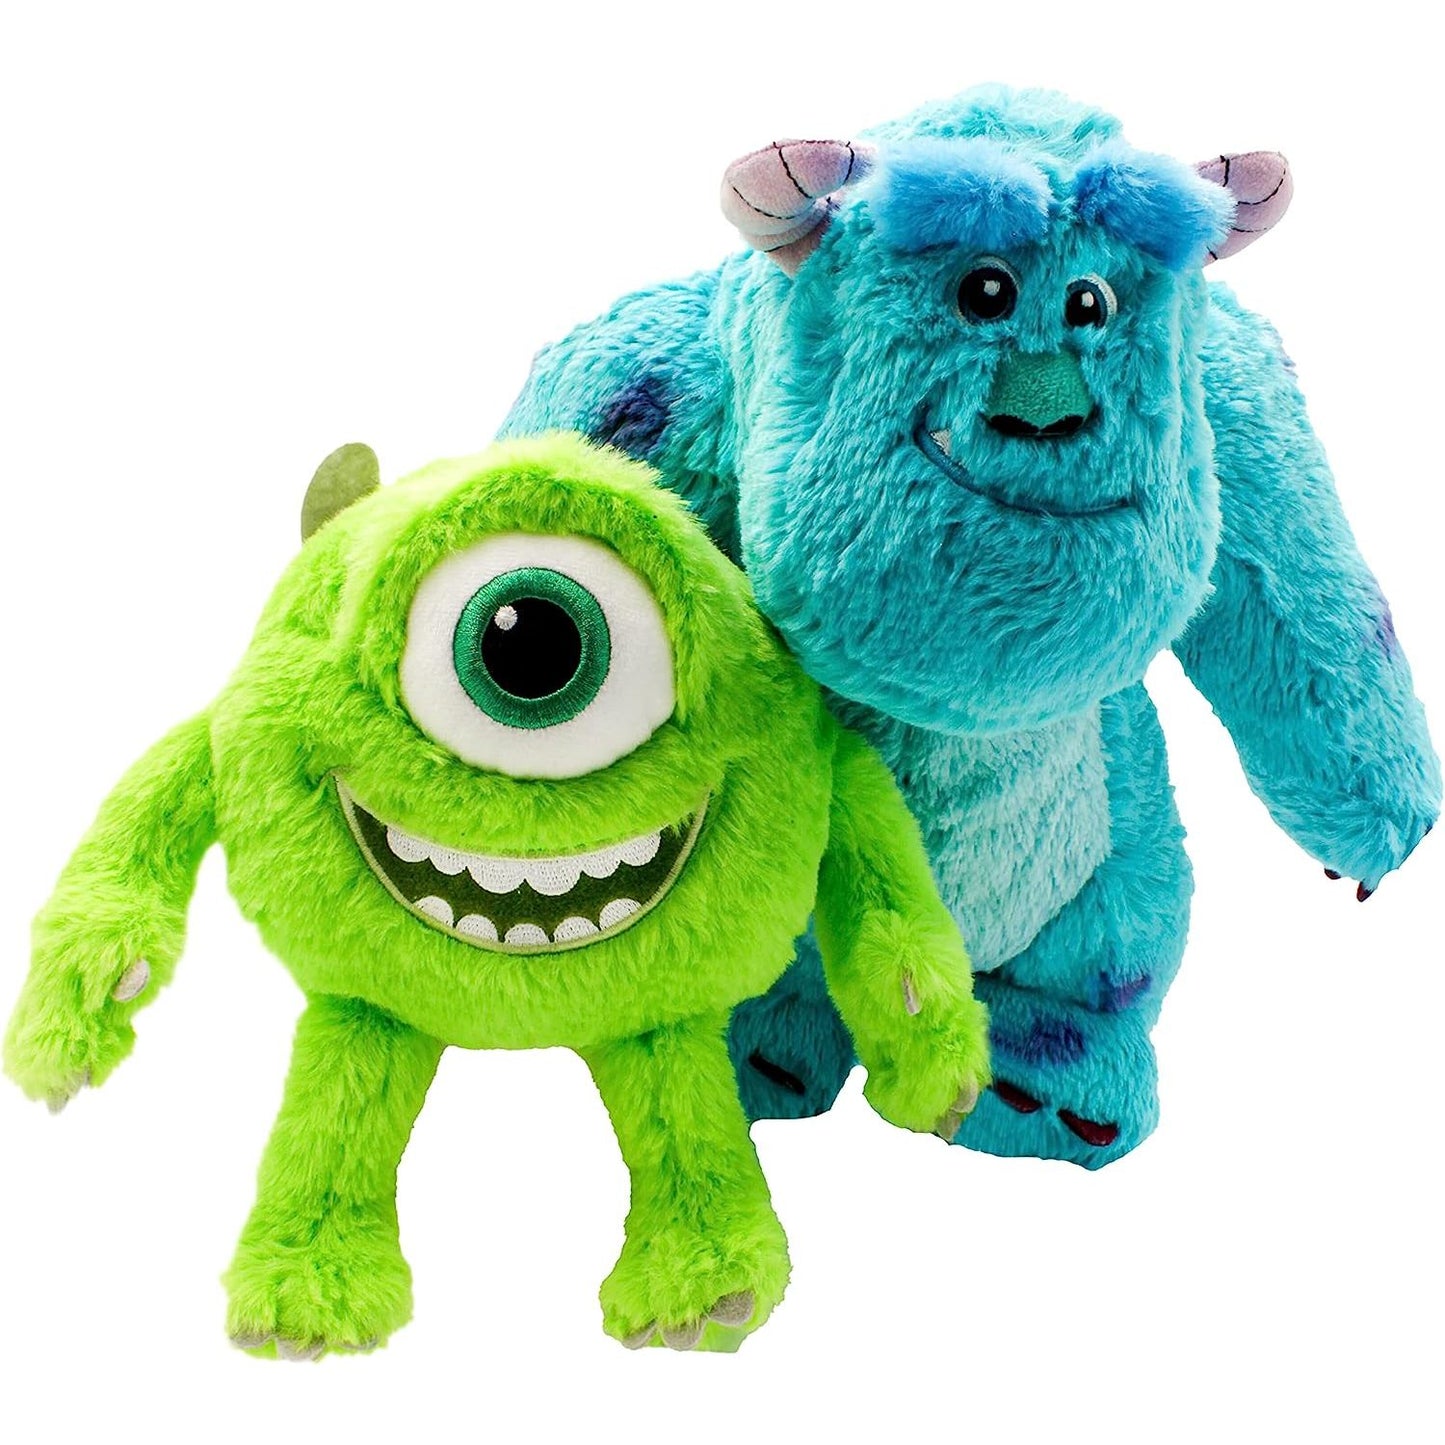 Disney - Pixar - Monsters Inc. - Soft Plush Sulley with Mike side by side